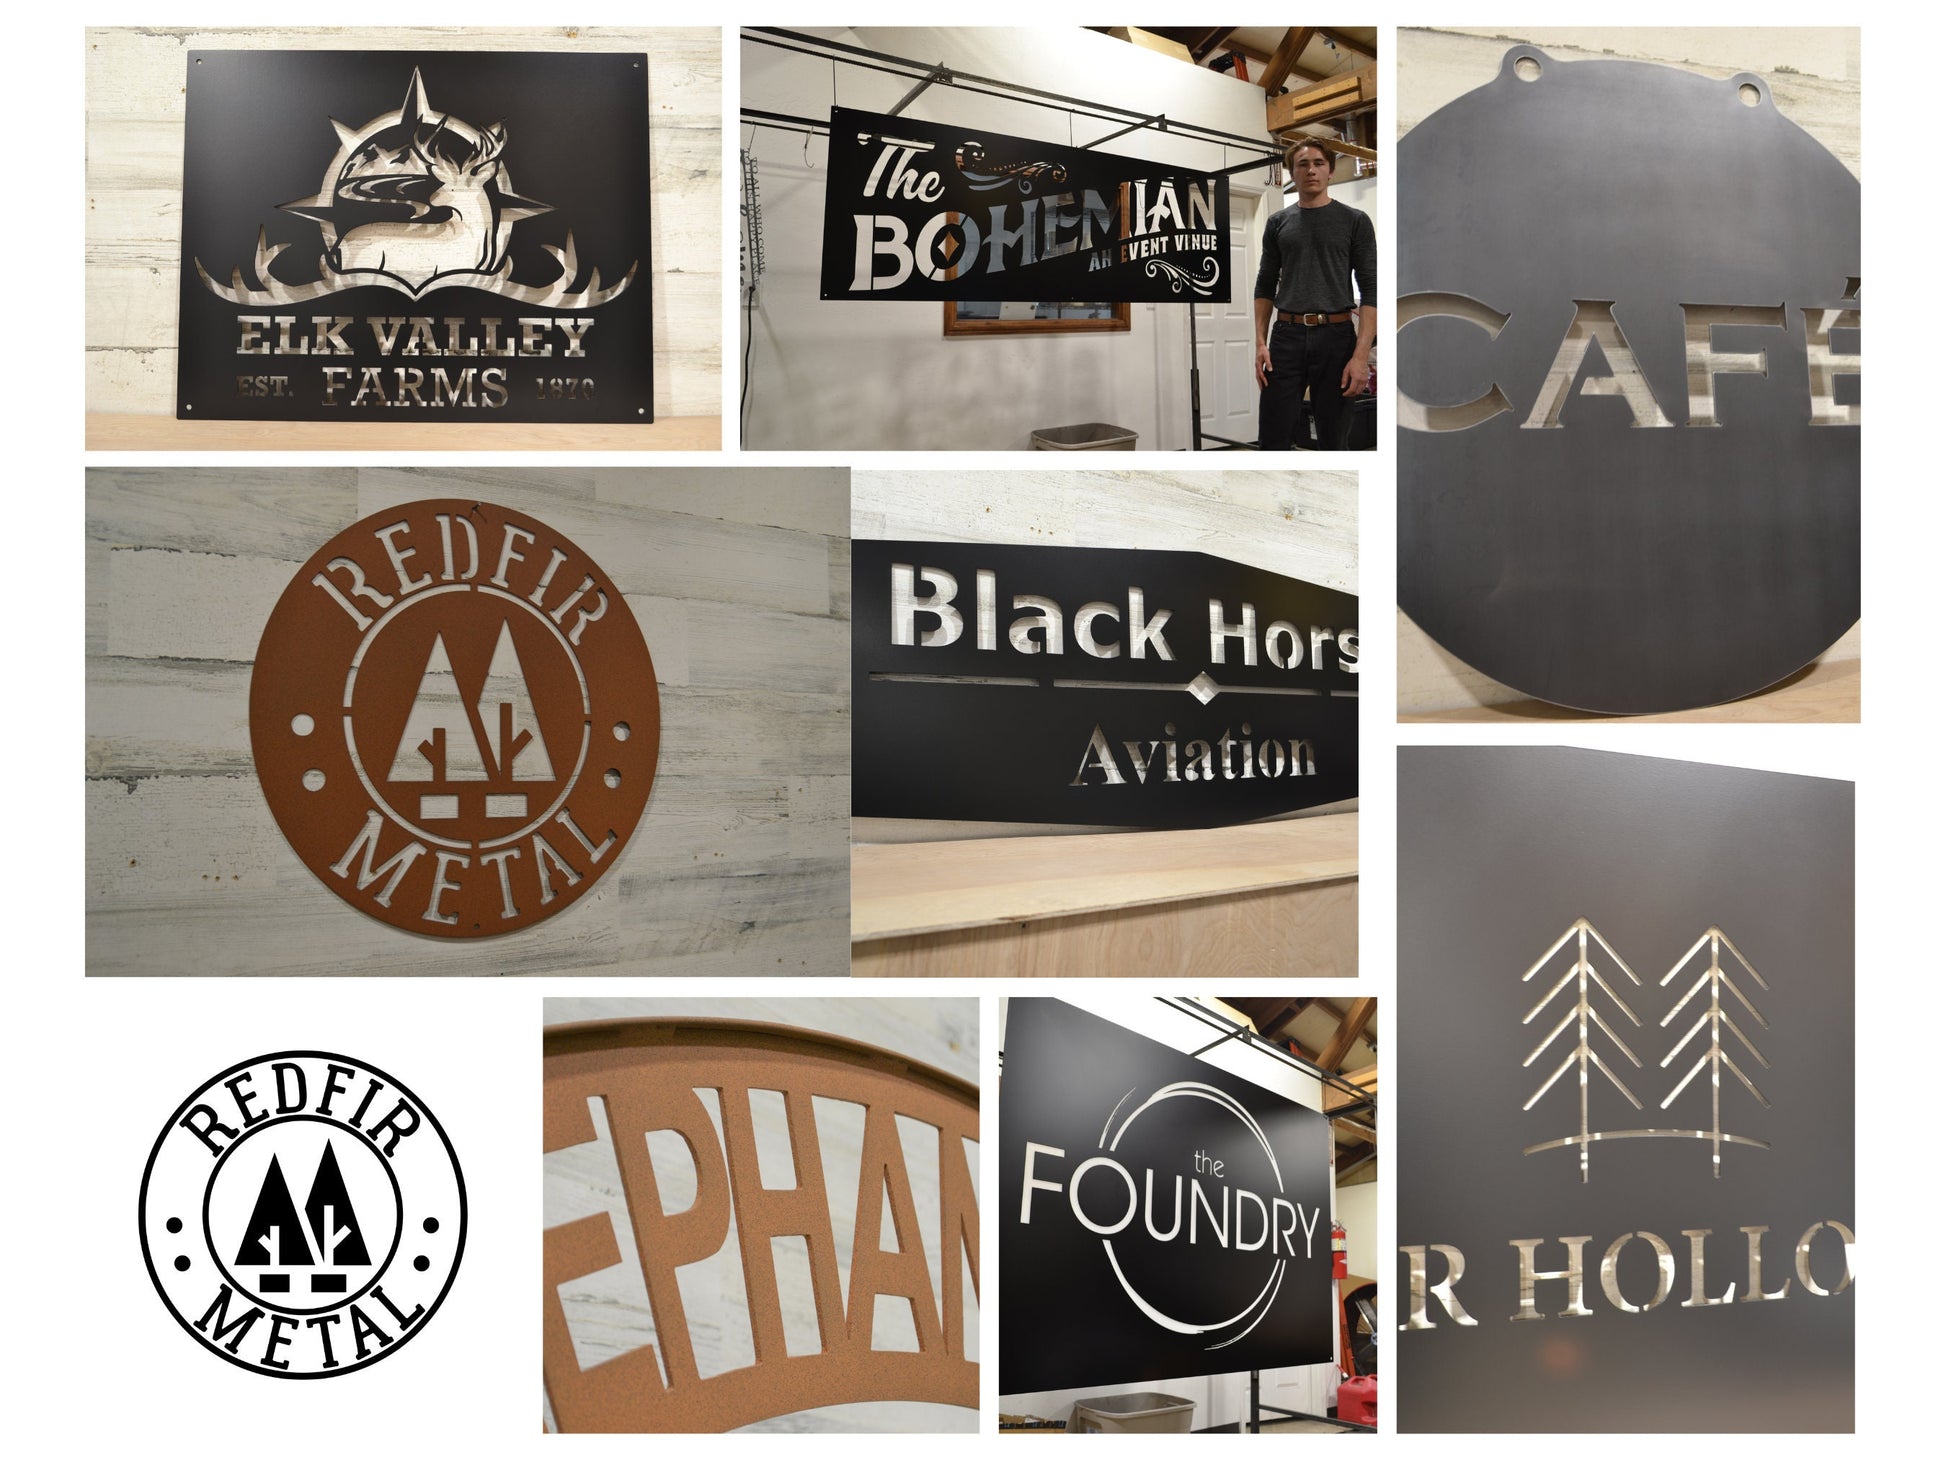 Personalized Business Logo Metal Signs - Your Logo or Artwork - Custom Sign - Wedding Gifts - Metal Wall Decor - Address Sign -